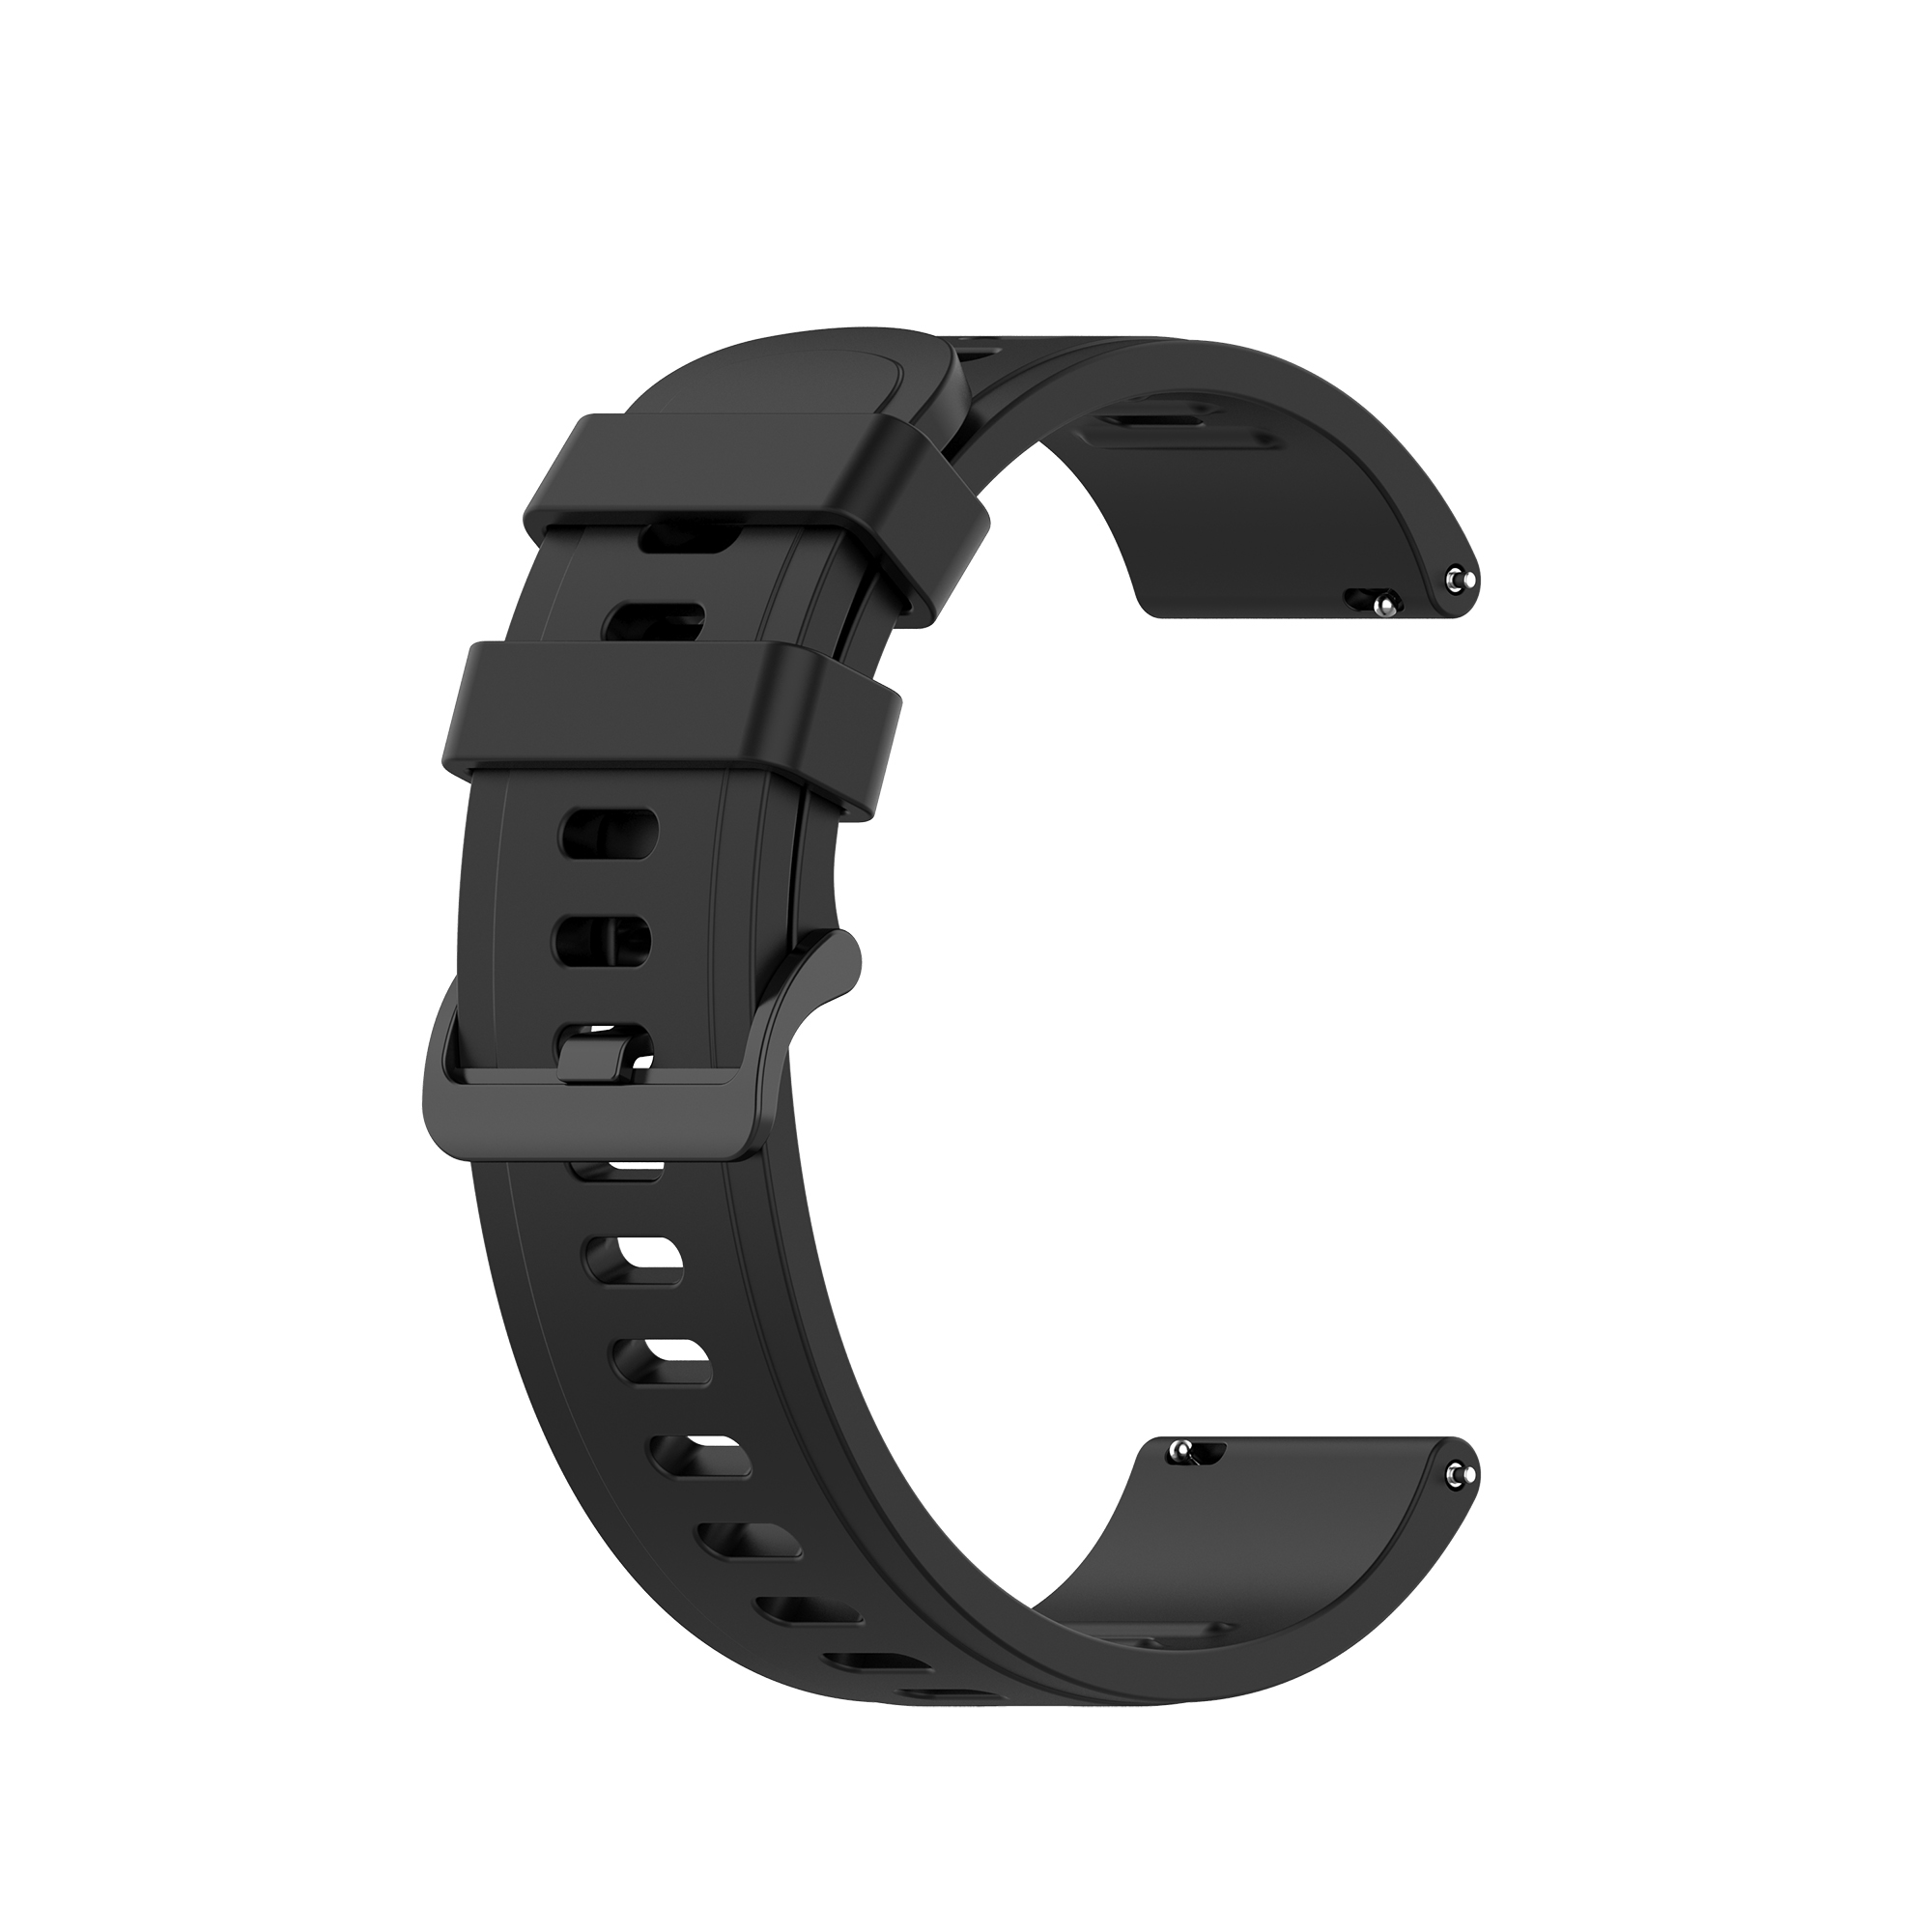 Bakeey-2022mm-Pure-Color-Sweatproof-Soft-Silicone-Watch-Band-Strap-Replacement-for-Garmin-Vivowatch-1773645-6